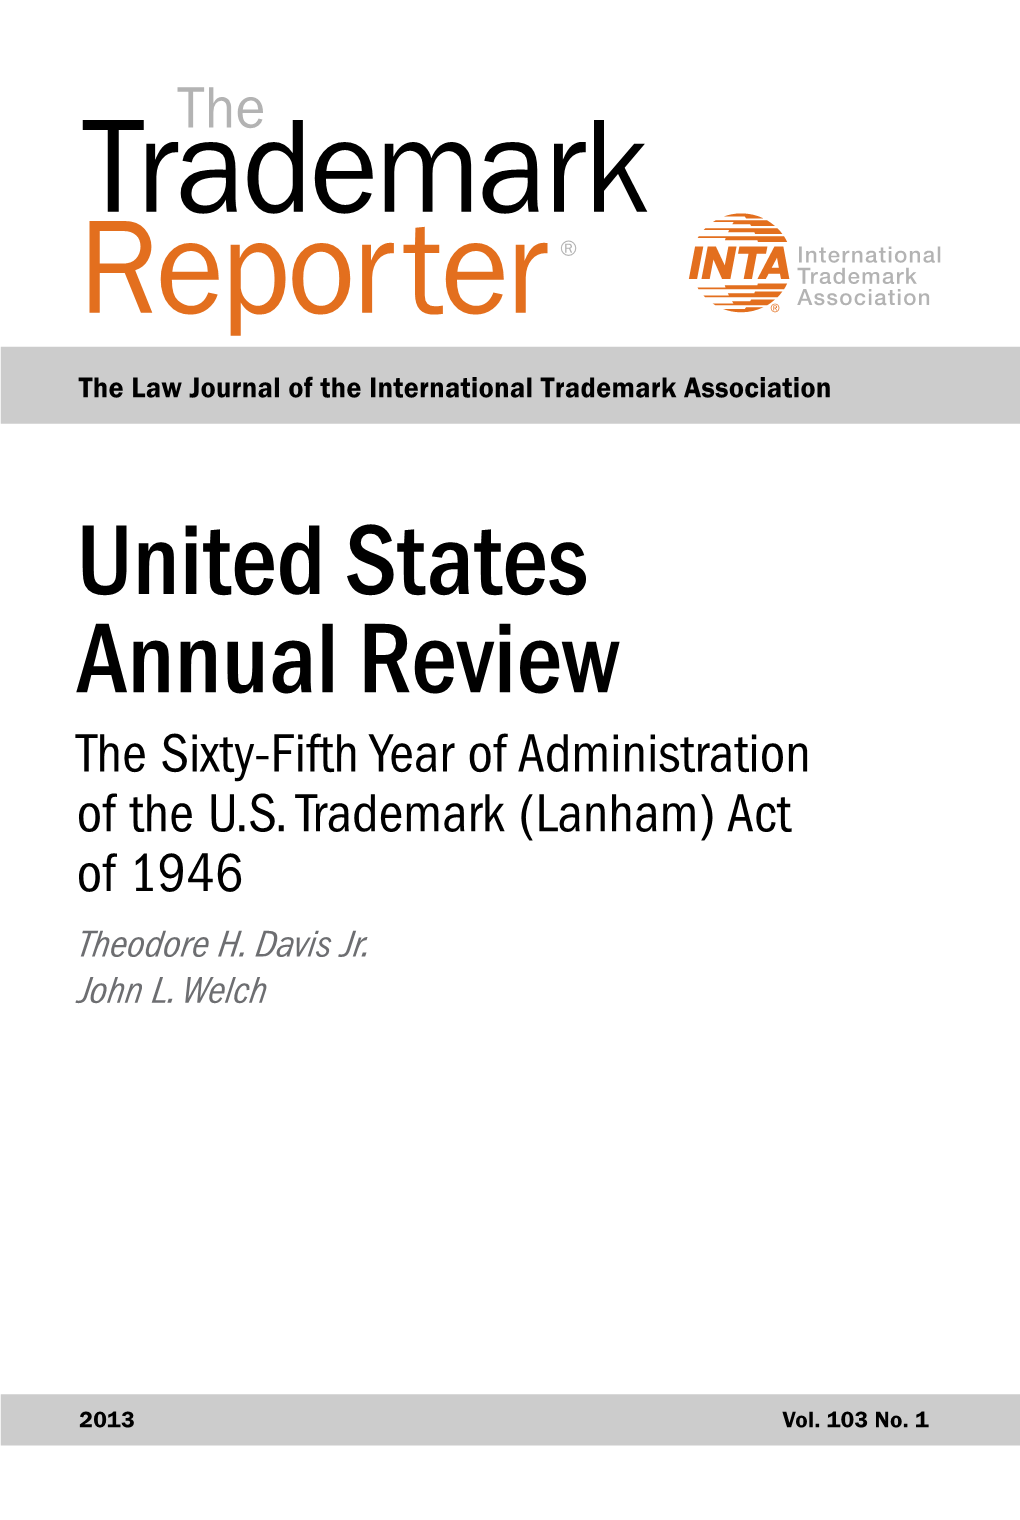 United States Annual Review the Sixty-Fifth Year of Administration of the U.S